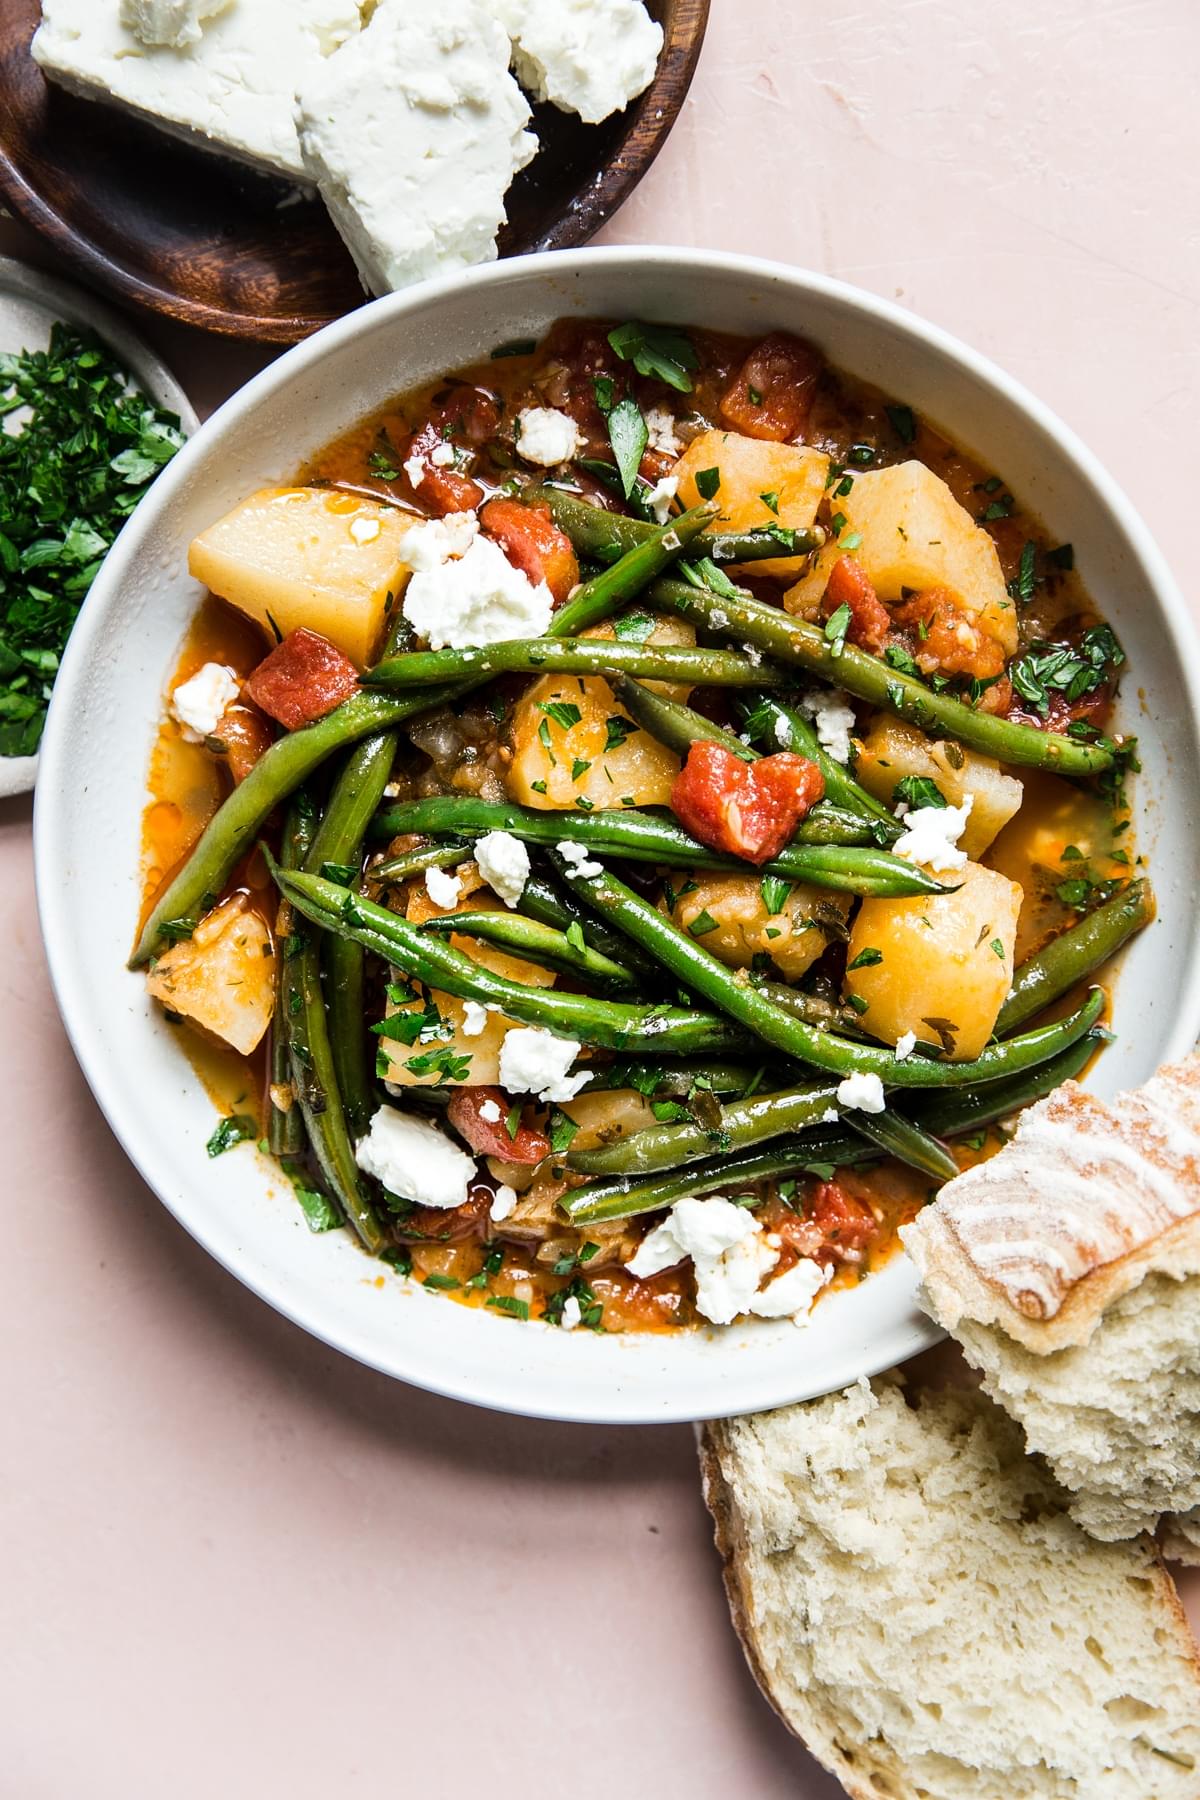 Fasolakia Greek Green Beans with bread, potatoes and tomatoes